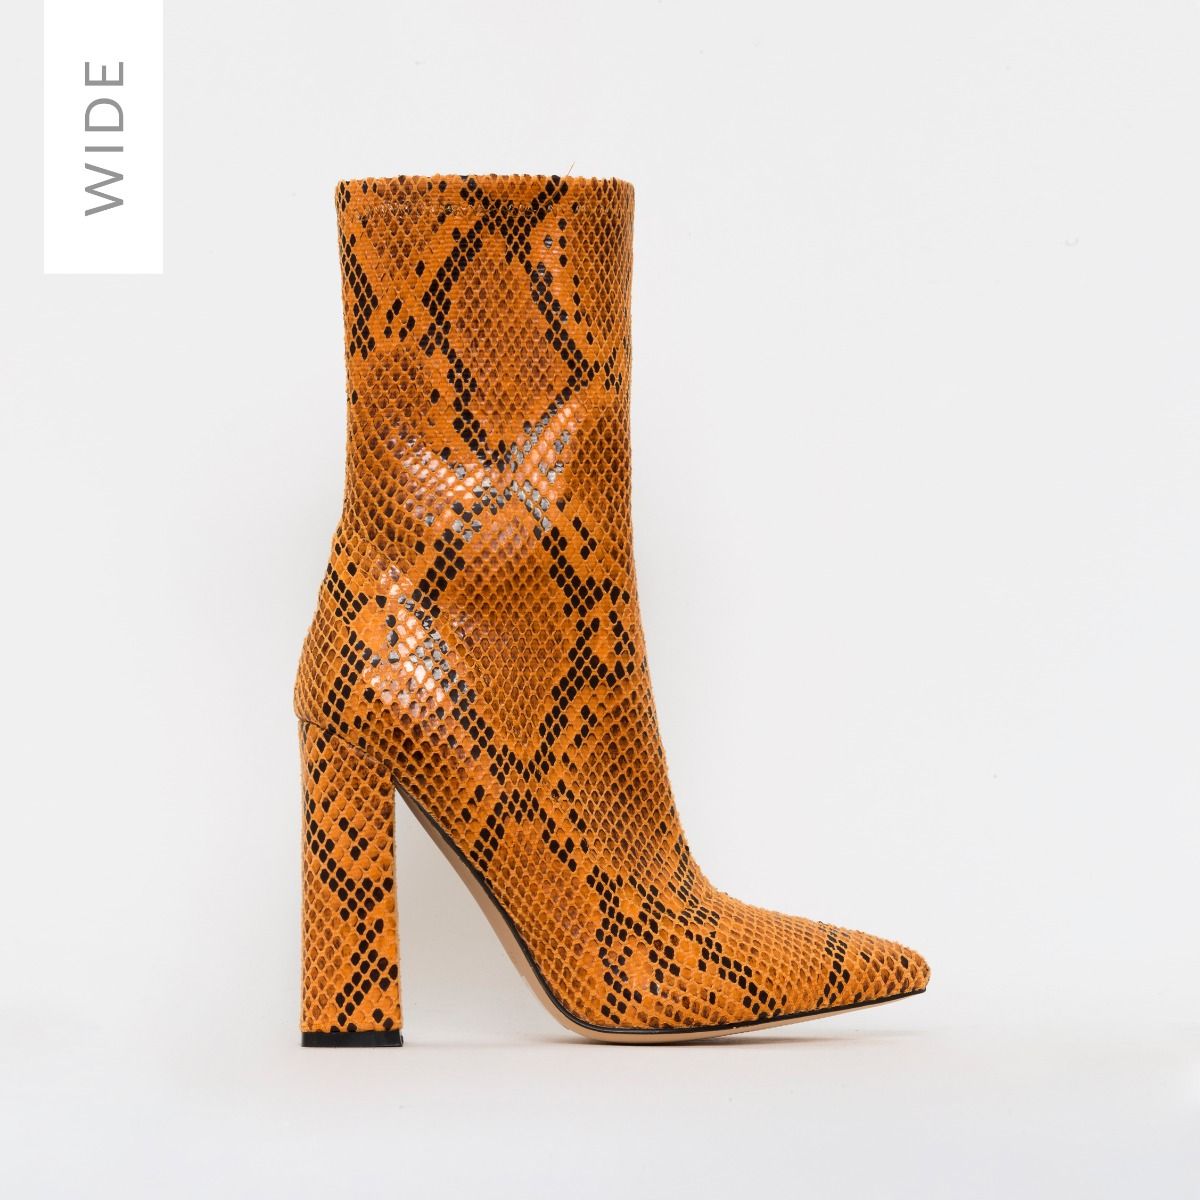 wide fit snake print shoes